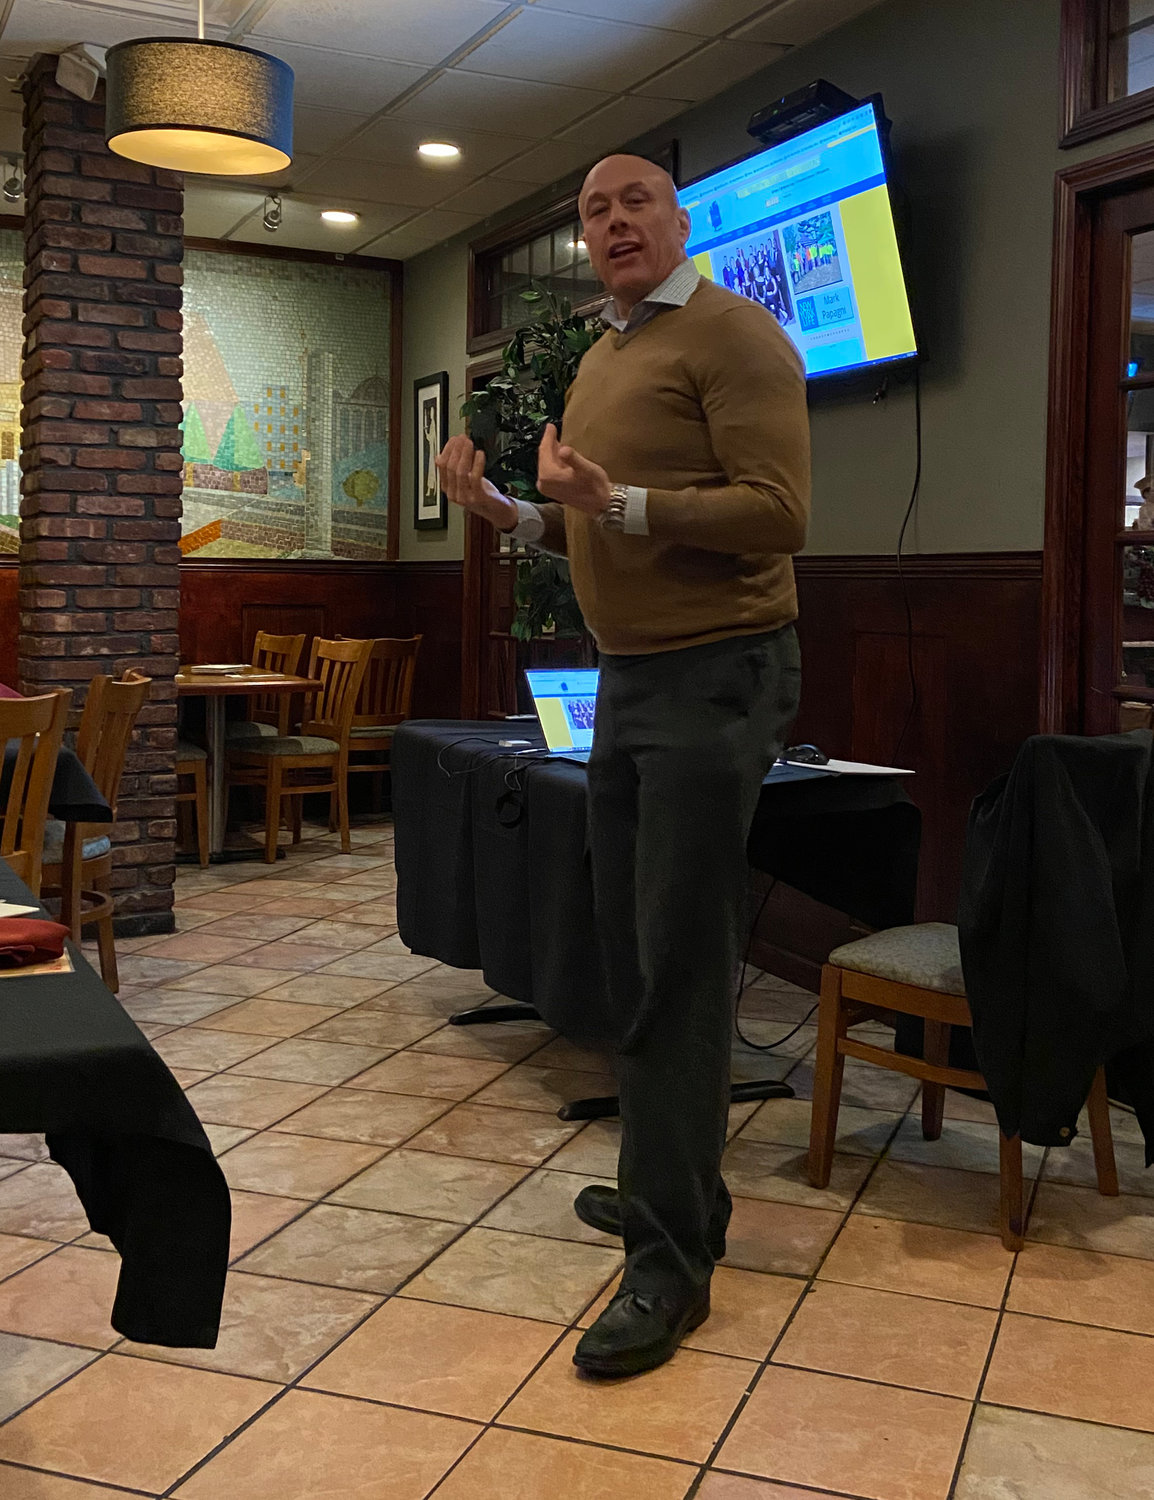 Brian LeDonne from PS Digital LI, an internet marketing service, came down to the East Meadow Chamber of Commerce meeting on March 1 to give chamber members some tips on how to better their business’s digital footprint.